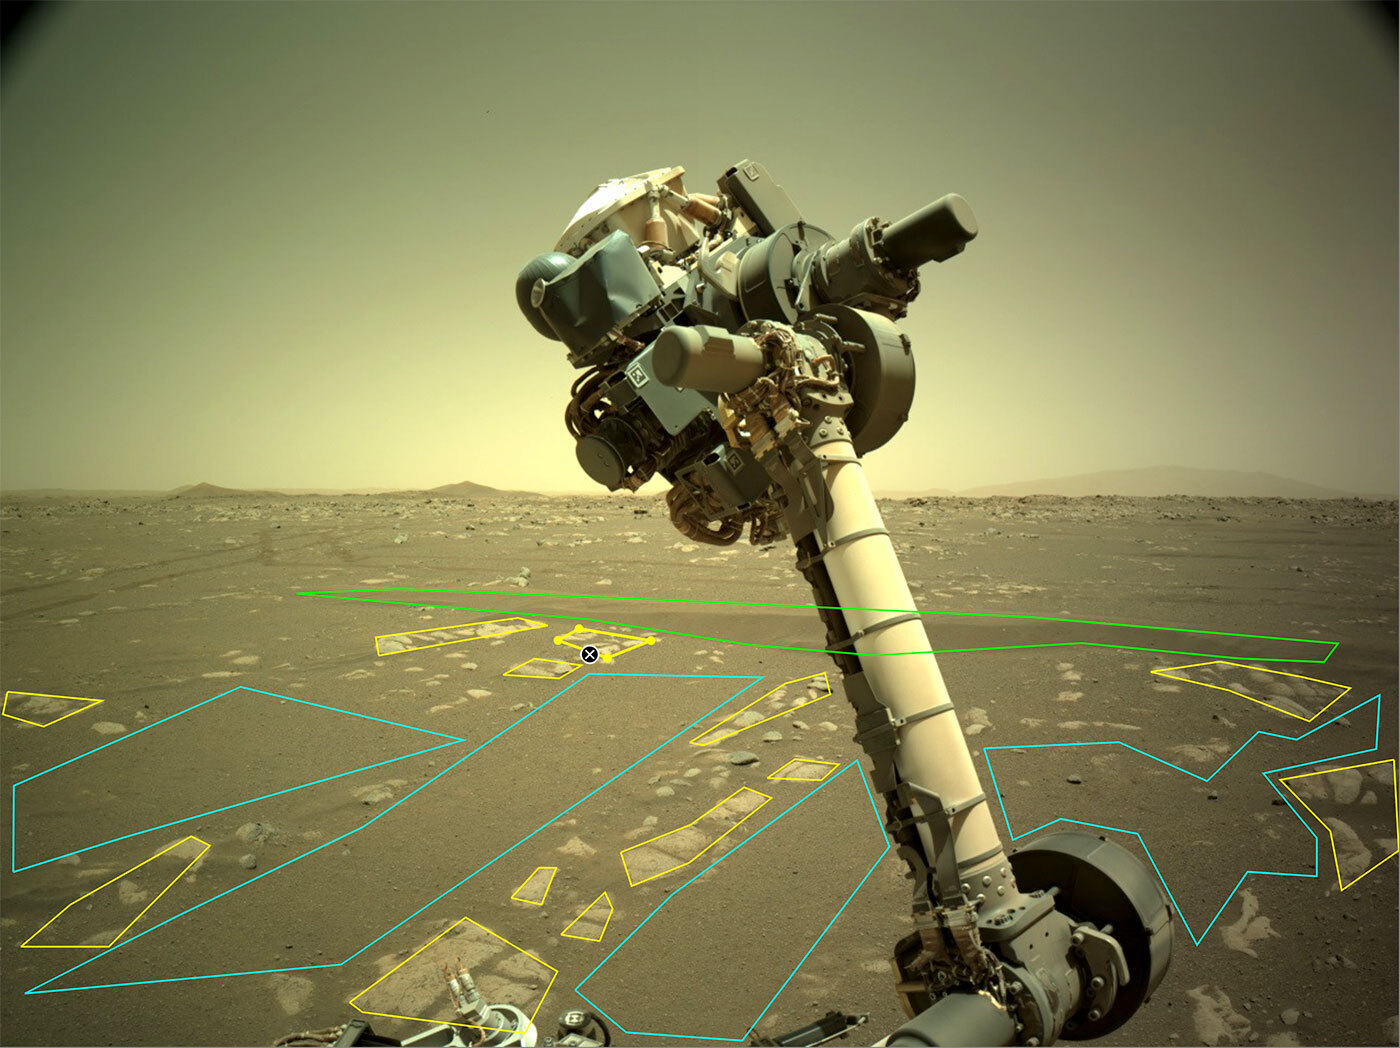 Read article: You Can Help Train NASA's Rovers to Better Explore Mars